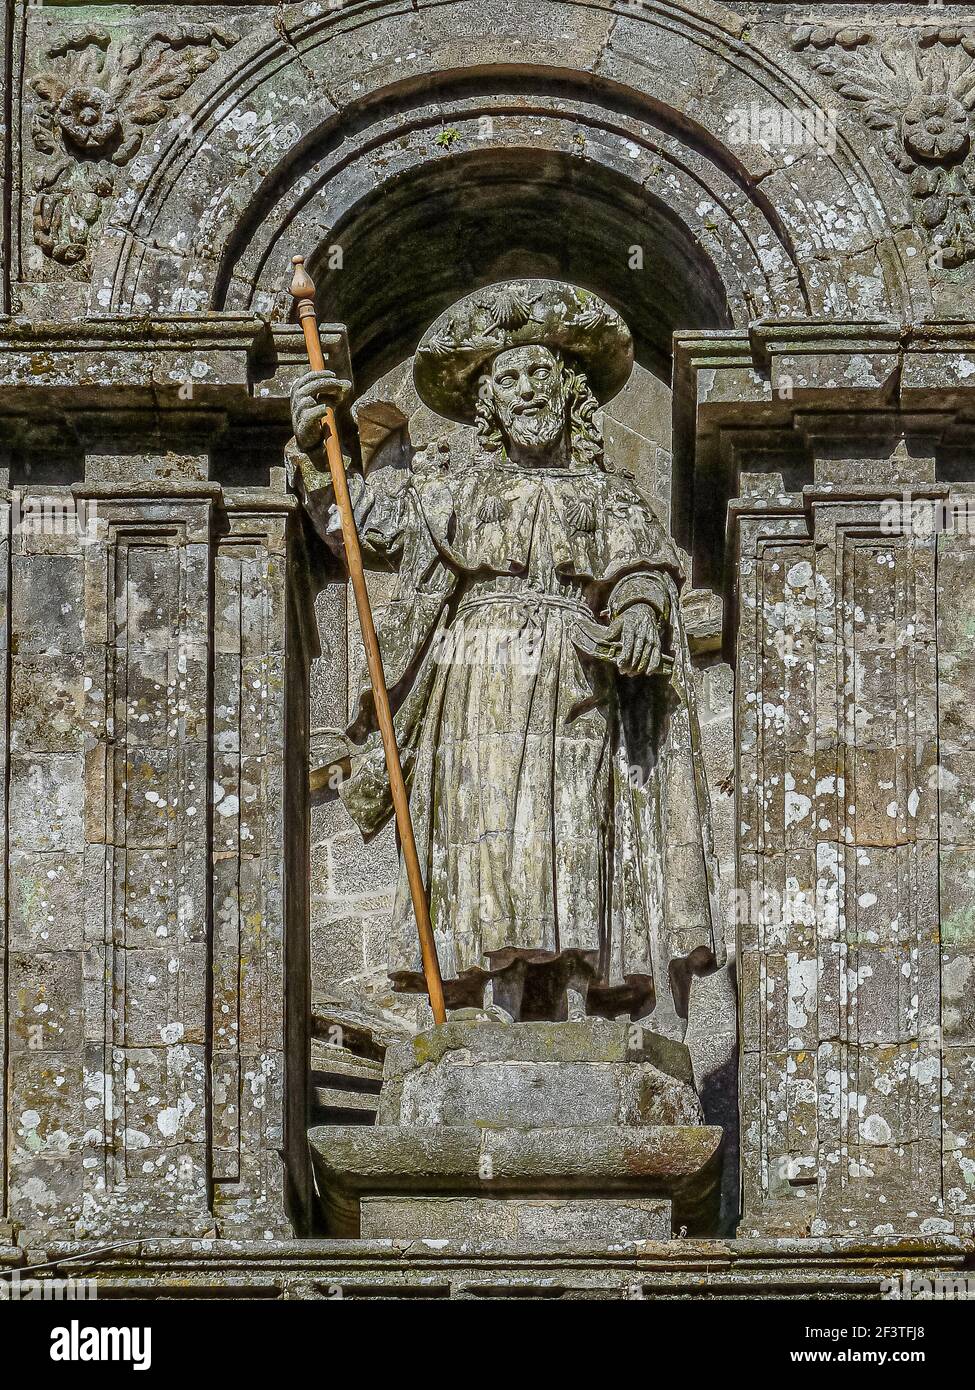 Statue of Saint James the Great over the holy gate of the cathedral in Santiago de compostela, Spain, July 25, 2010 Stock Photo